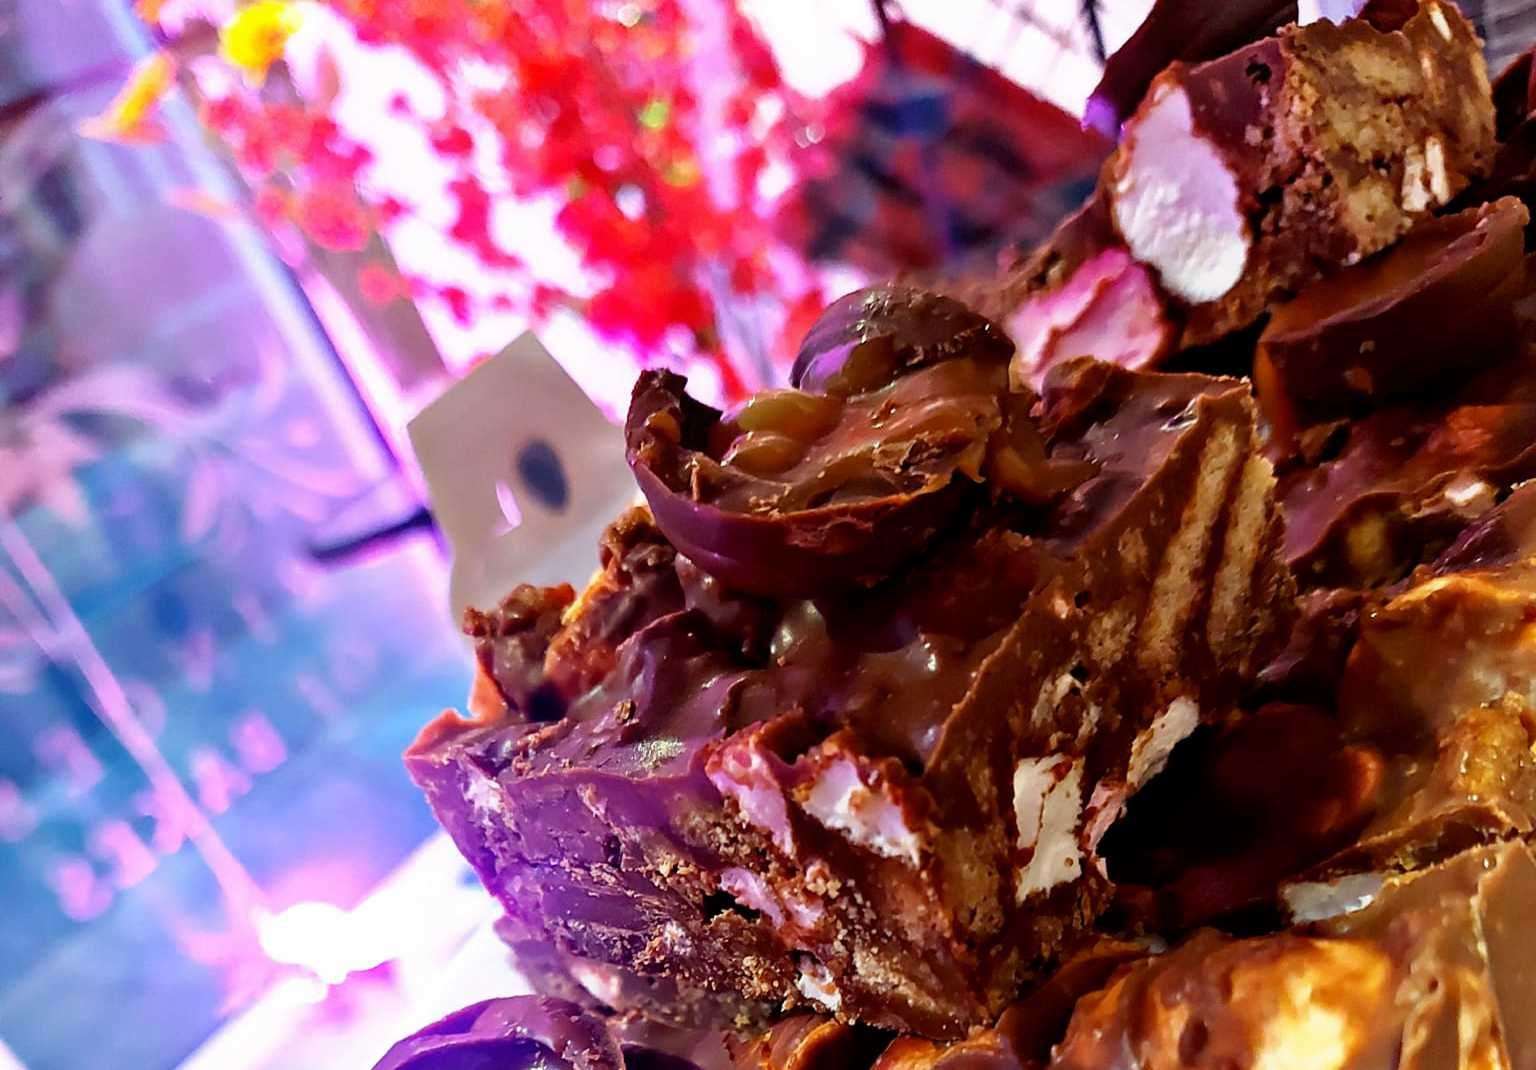 Rocky road is one of the many options available to customers at the shop in Canterbury Street. Picture: Princess of Bakes